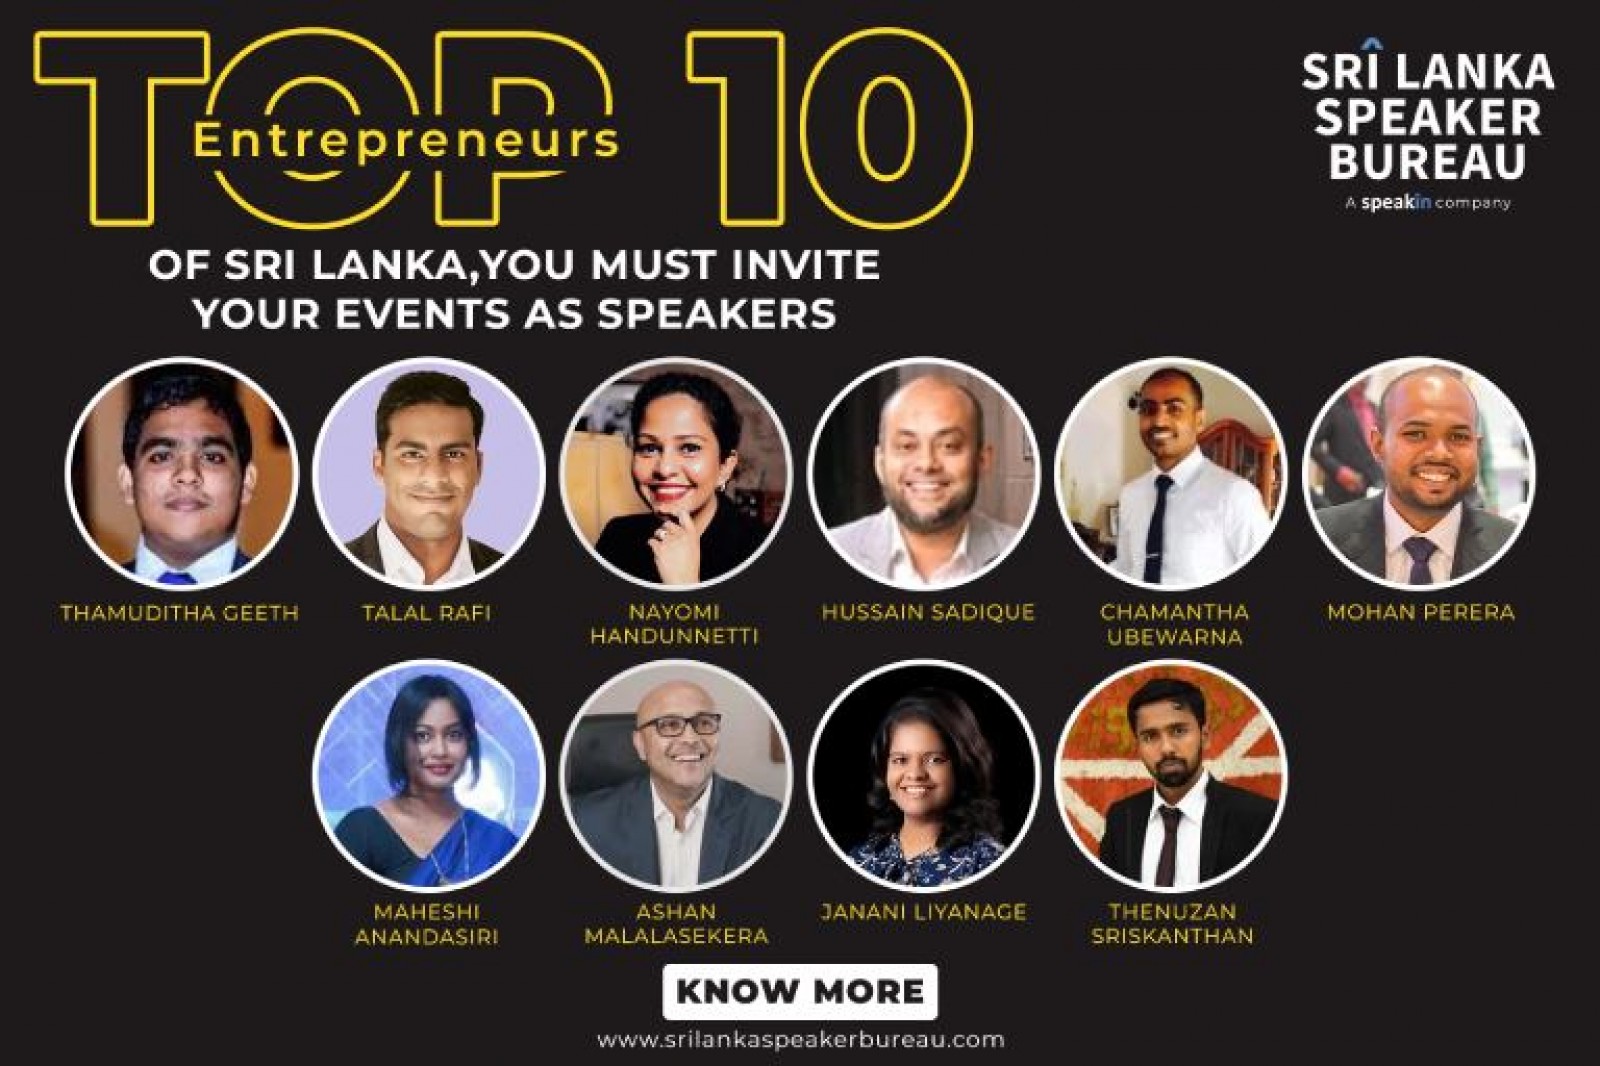 Top 10 Entrepreneurs of Sri Lanka, You Must Invite Your Events as Speakers